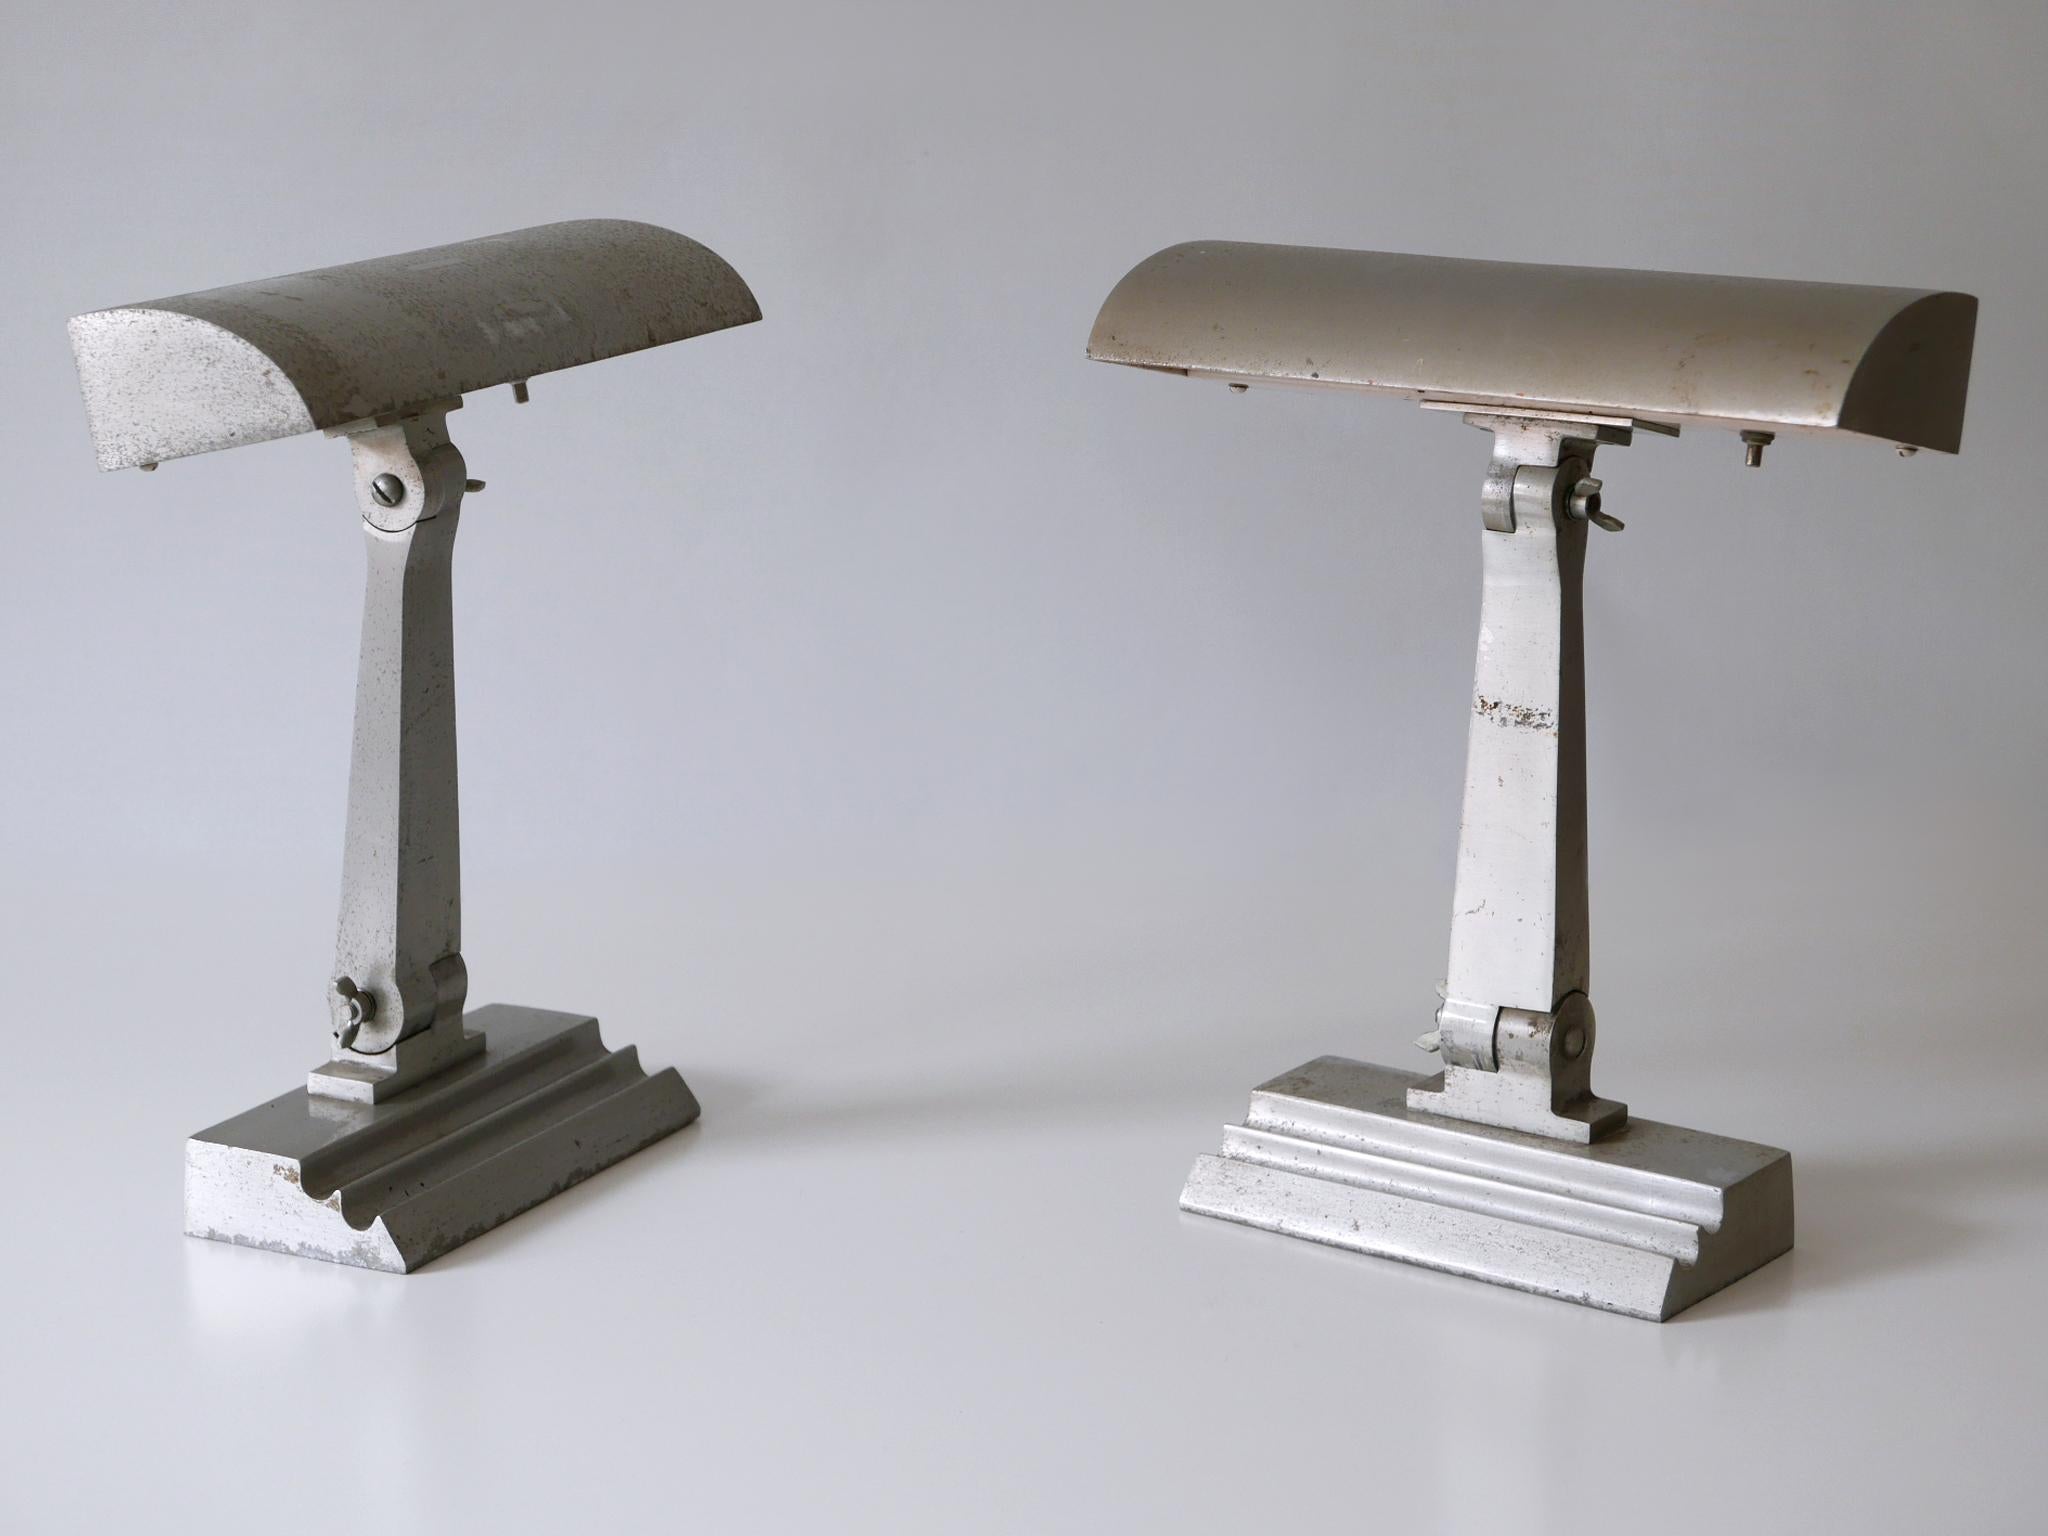 Set of two rare and elegant Art Deco cast aluminium desk or table lamps from an US cruiser ship. Arm and diffuser adjustable. Manufactured in USA, 1920s.

Attention please:
These lamps had been fixed by four screws directly to the desk or table to